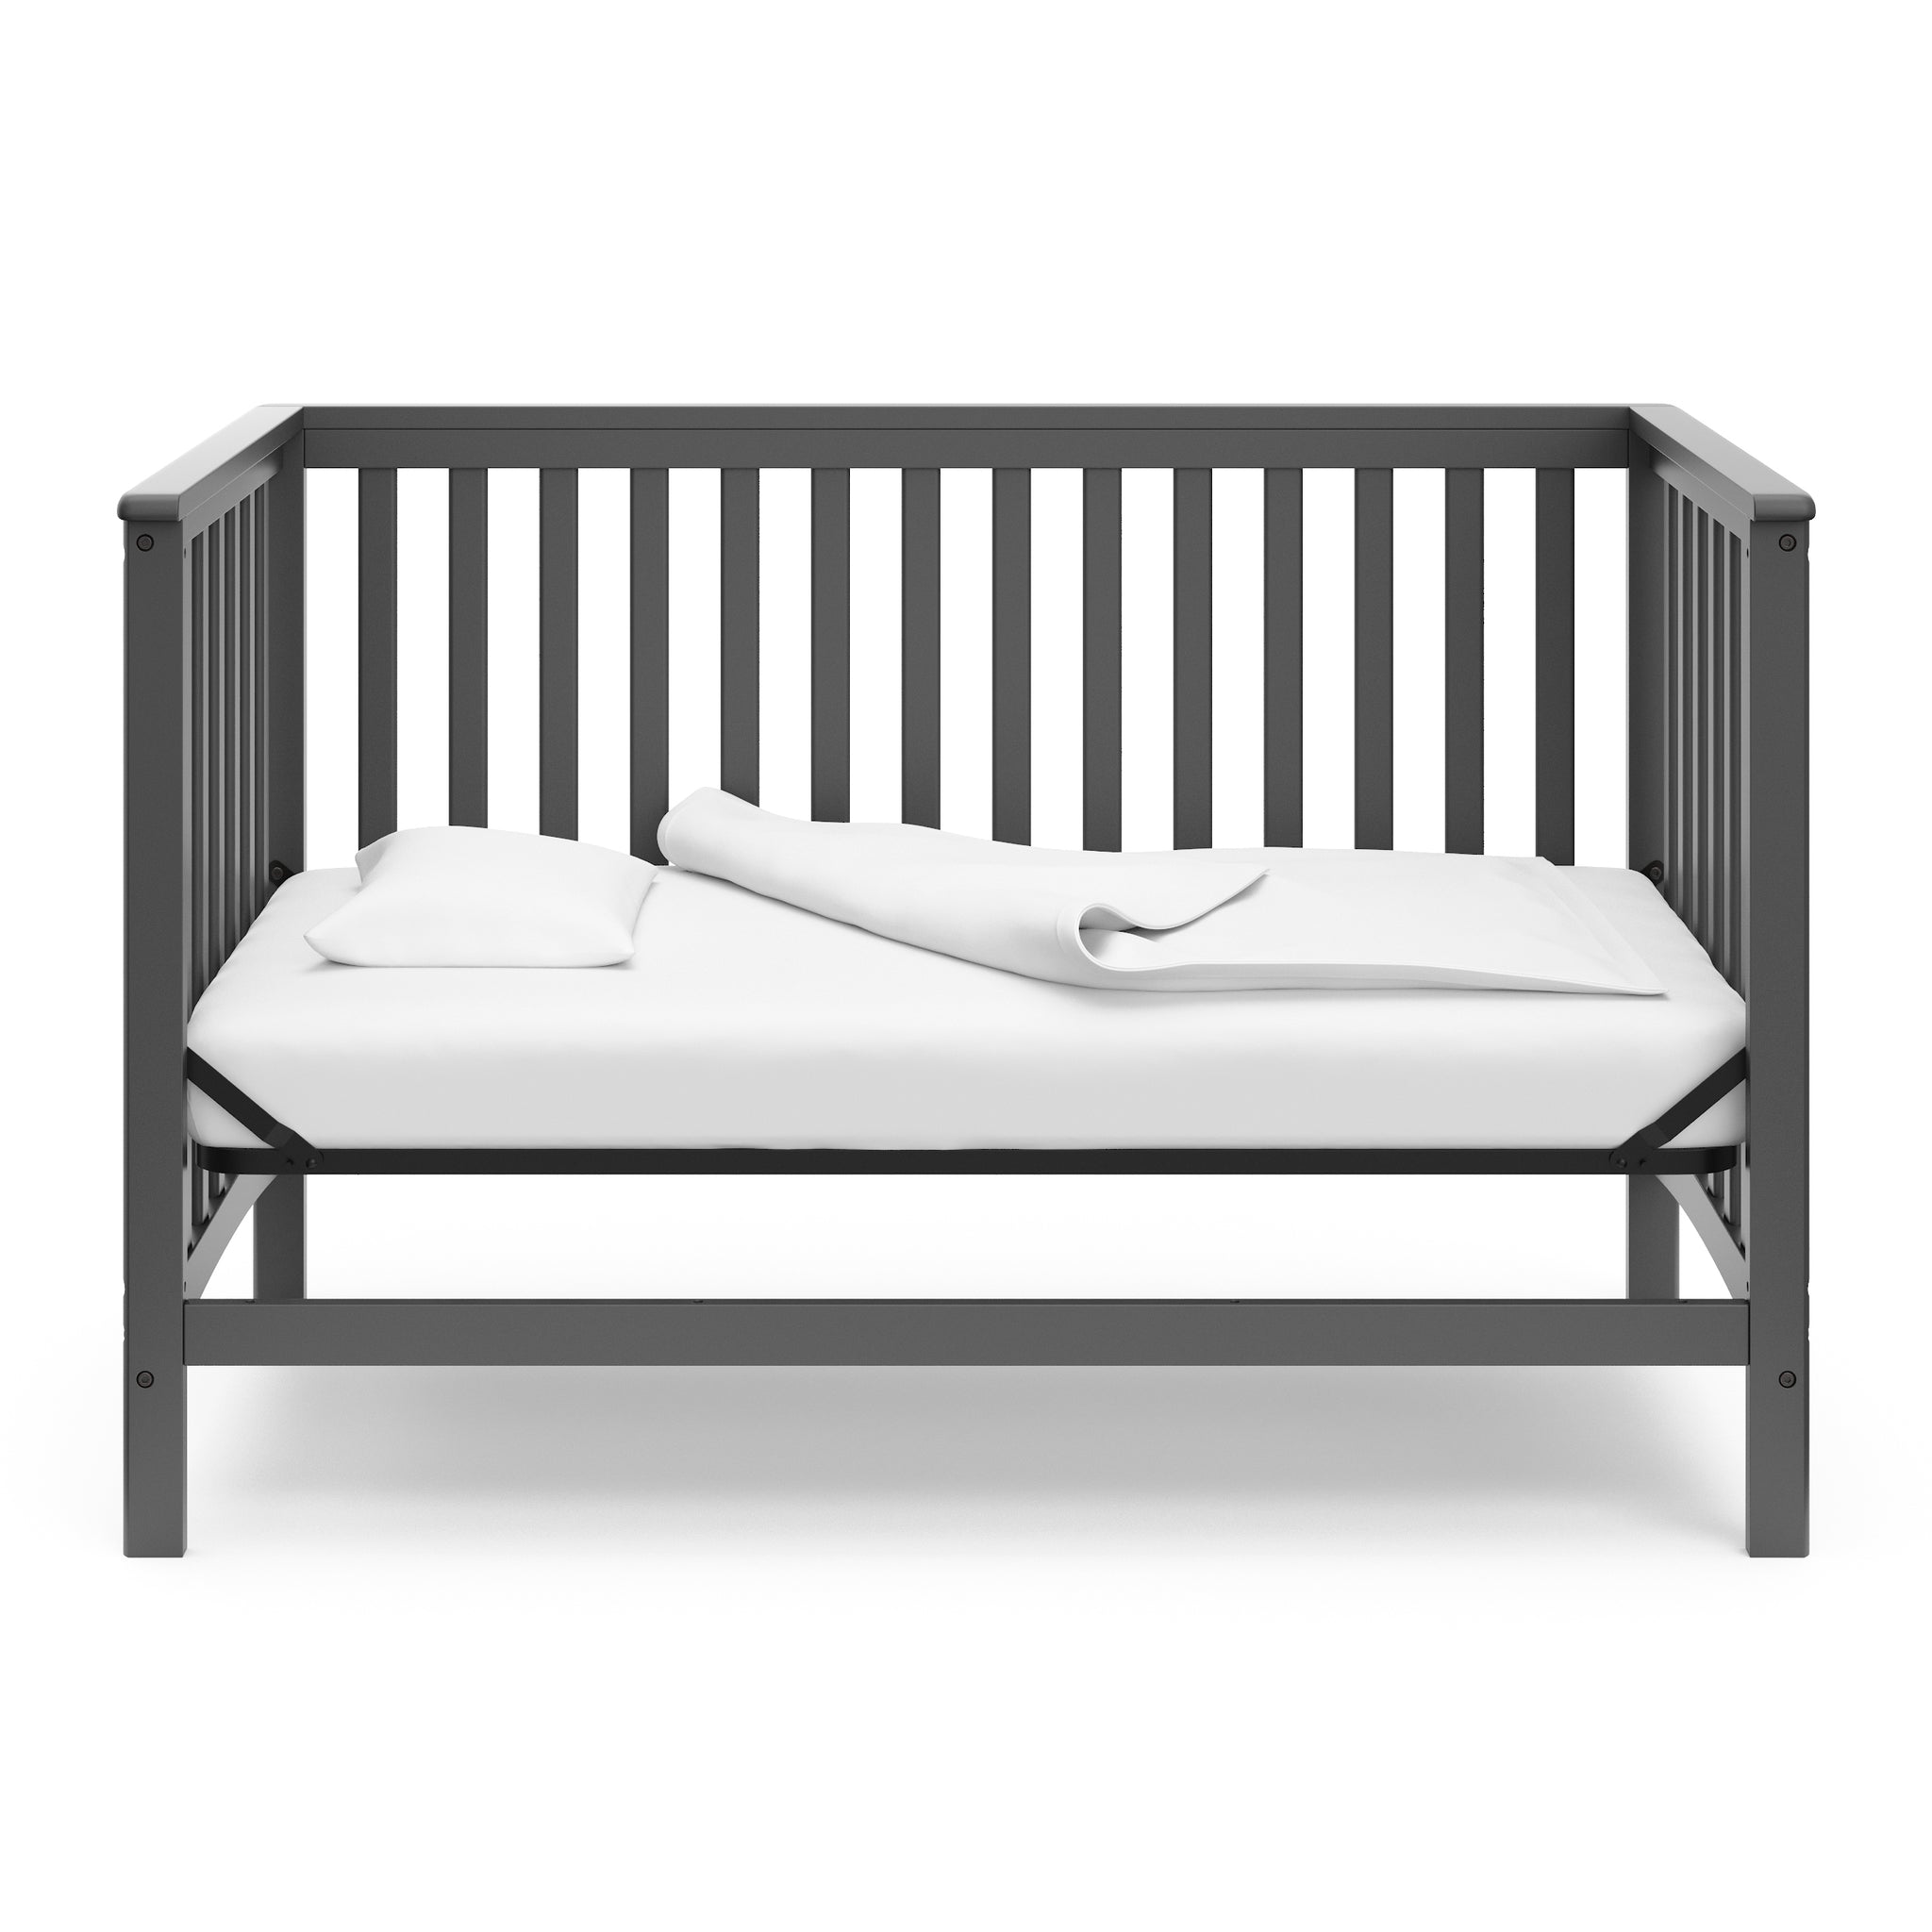 gray crib in daybed conversion